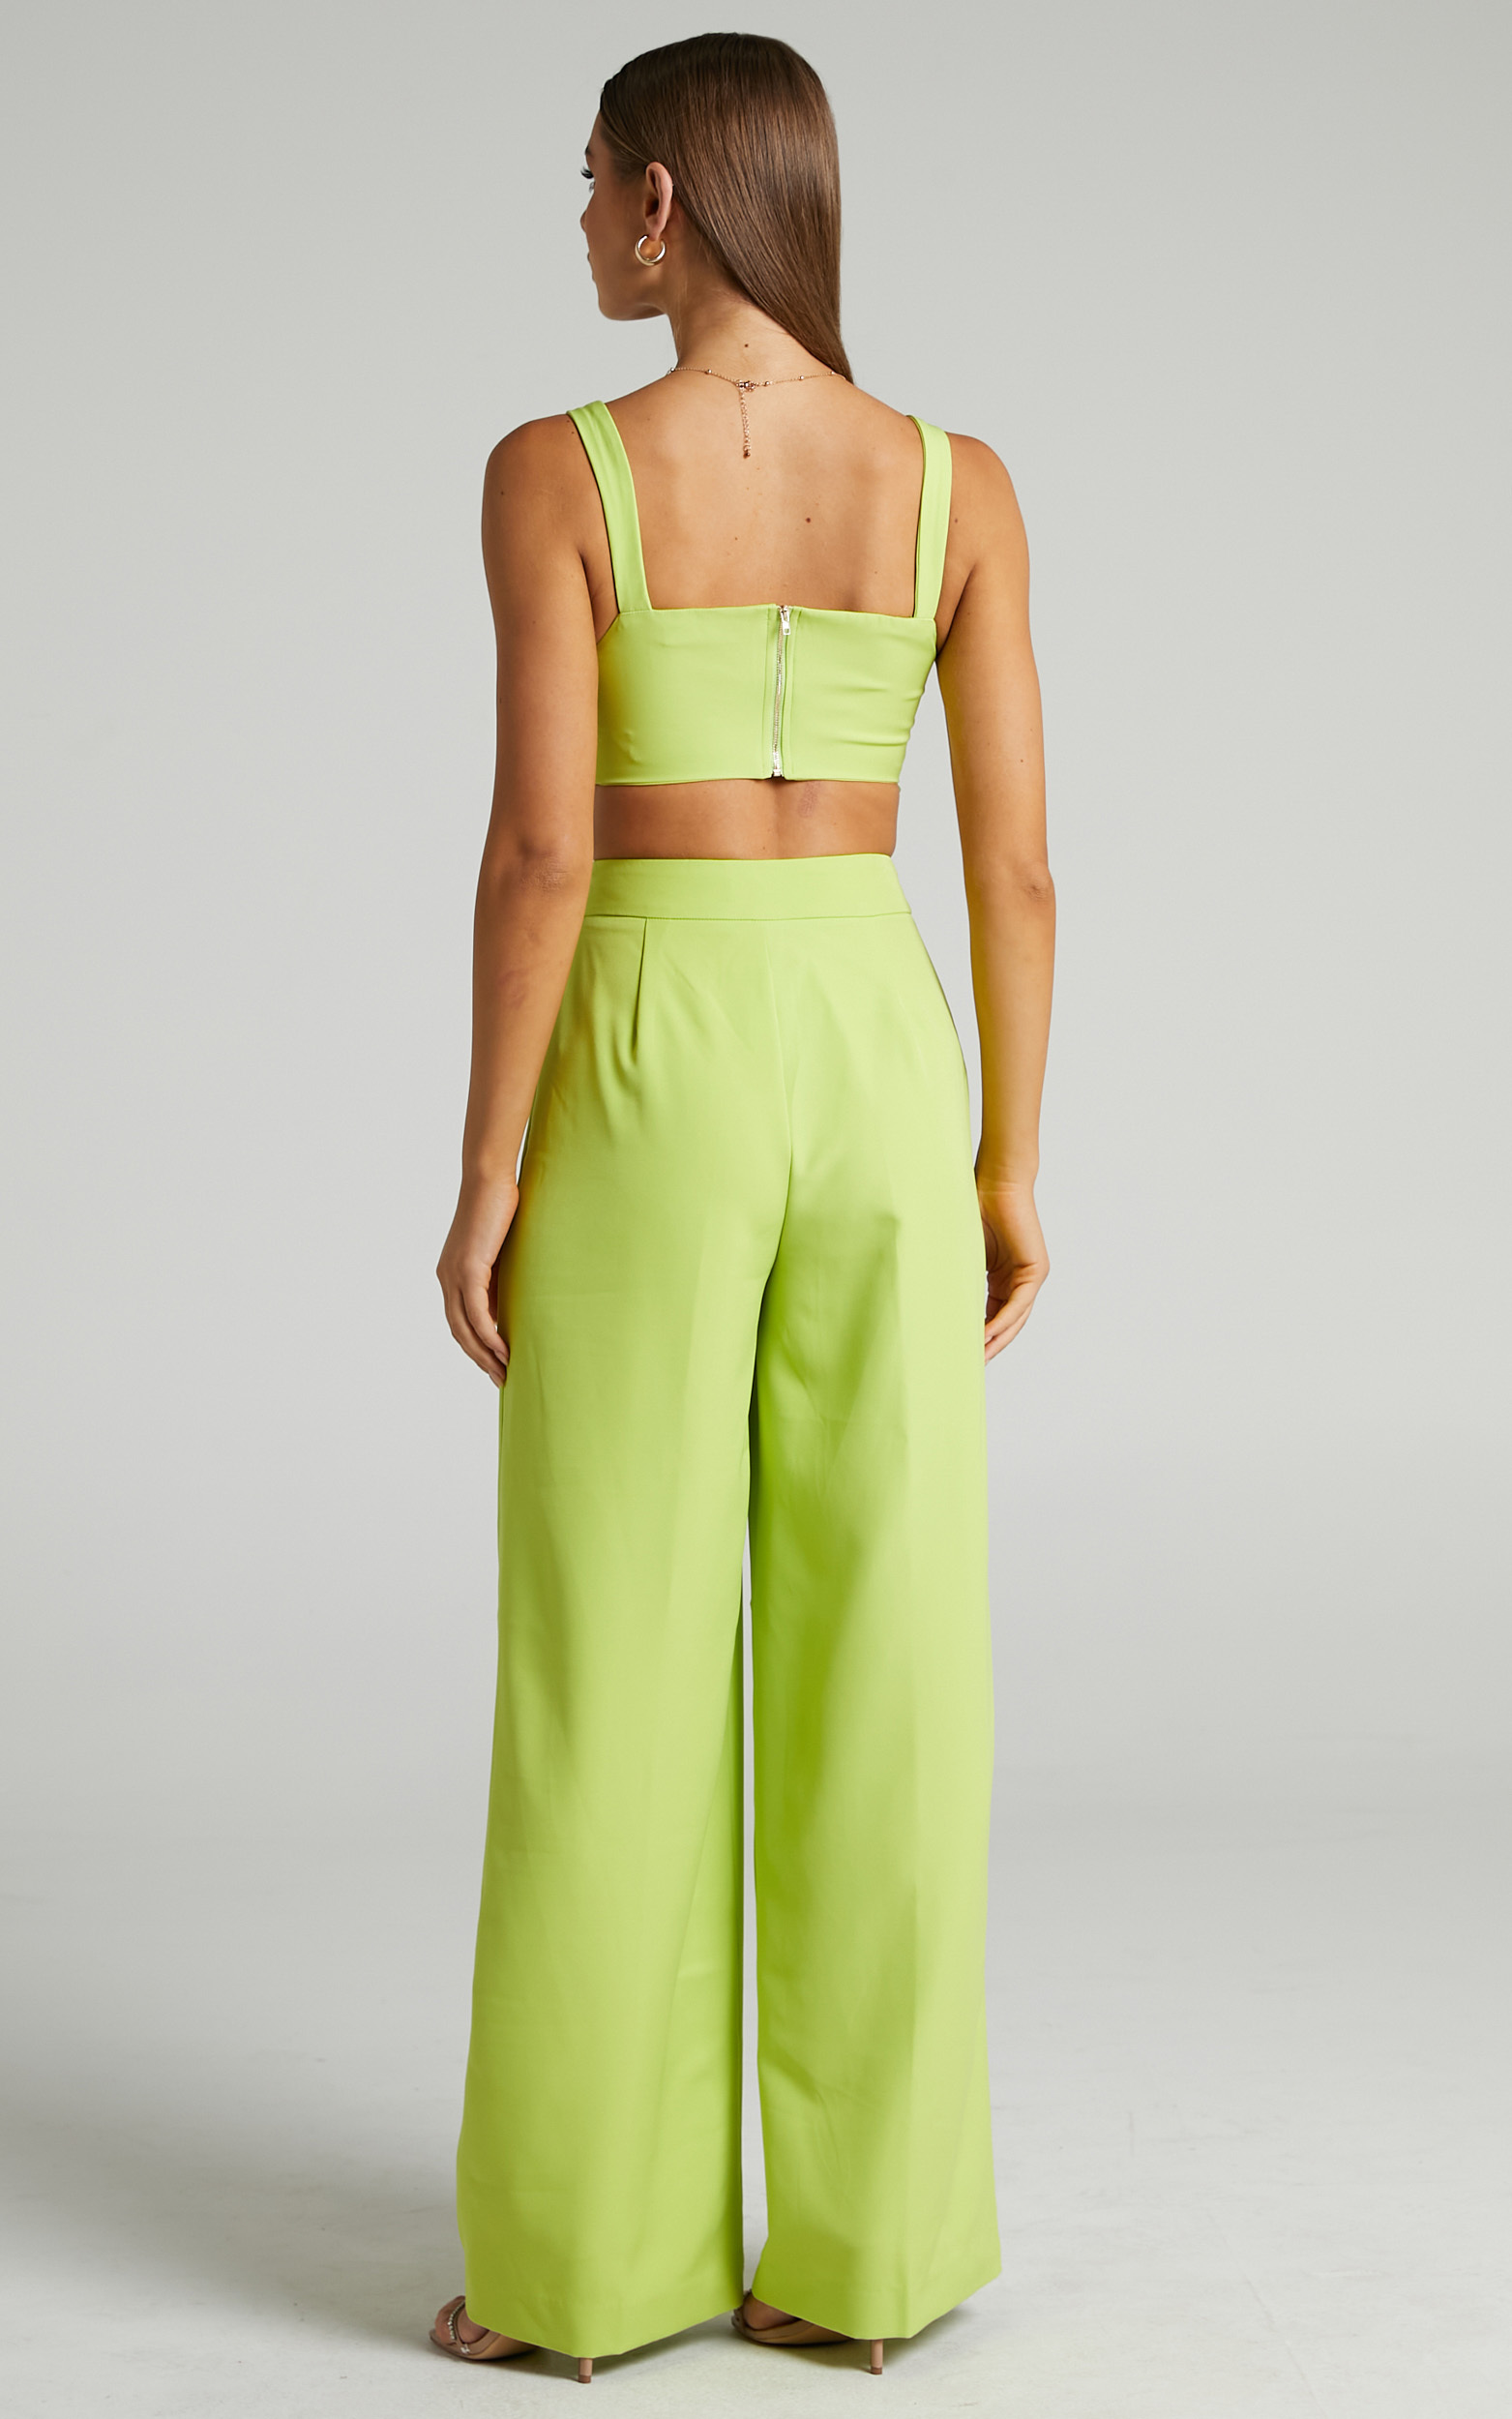 Maida V-Front Crop Top and Wide Leg Pants Two Piece Set in Lime | Showpo